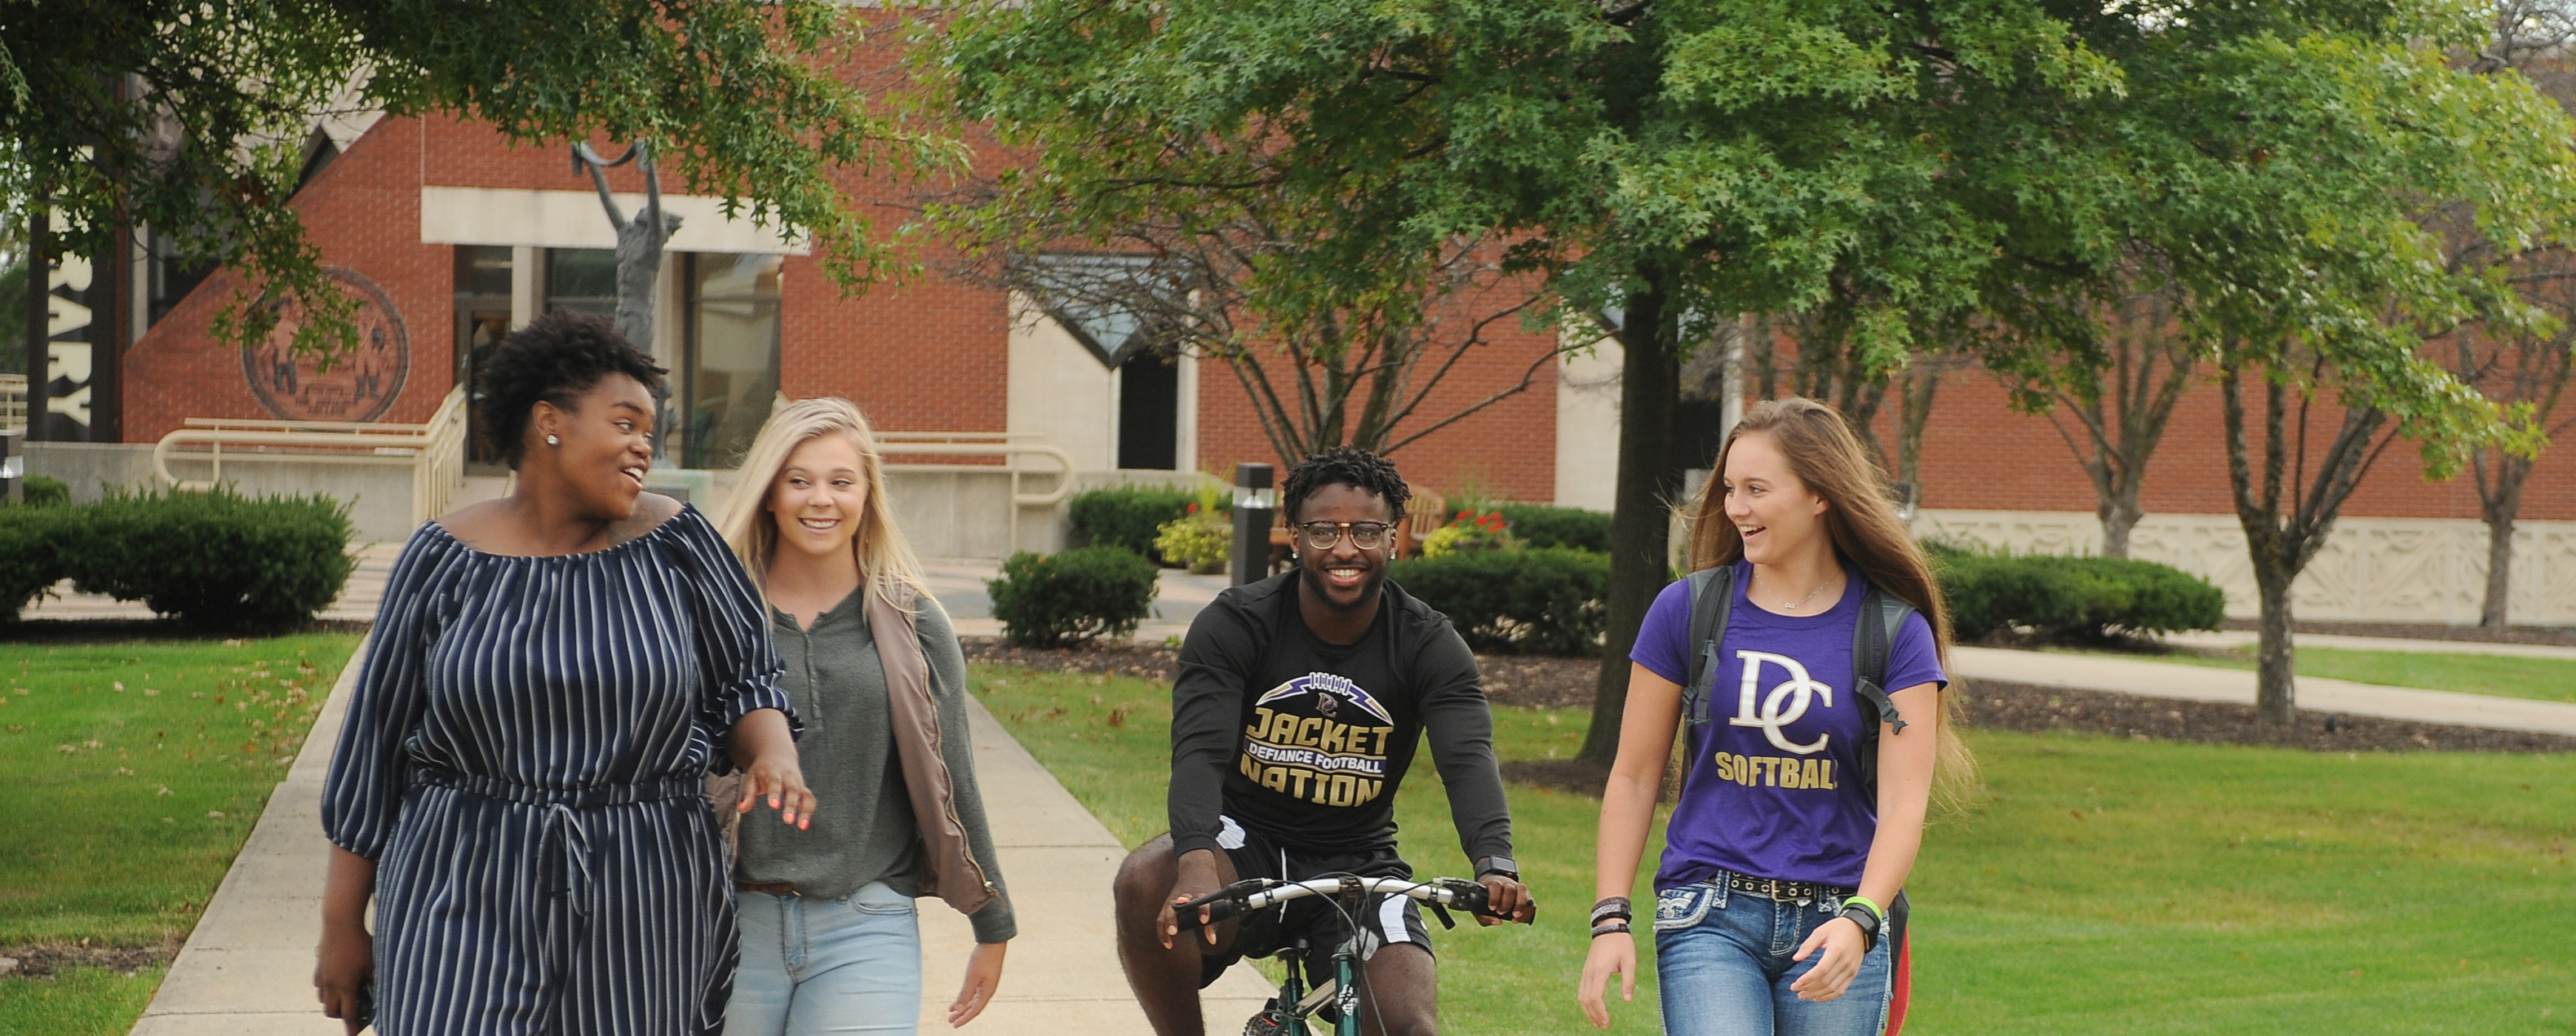 Three female students walking on a campus sidewalk with a male student on a bike. All are actively talking with each other and smiling.